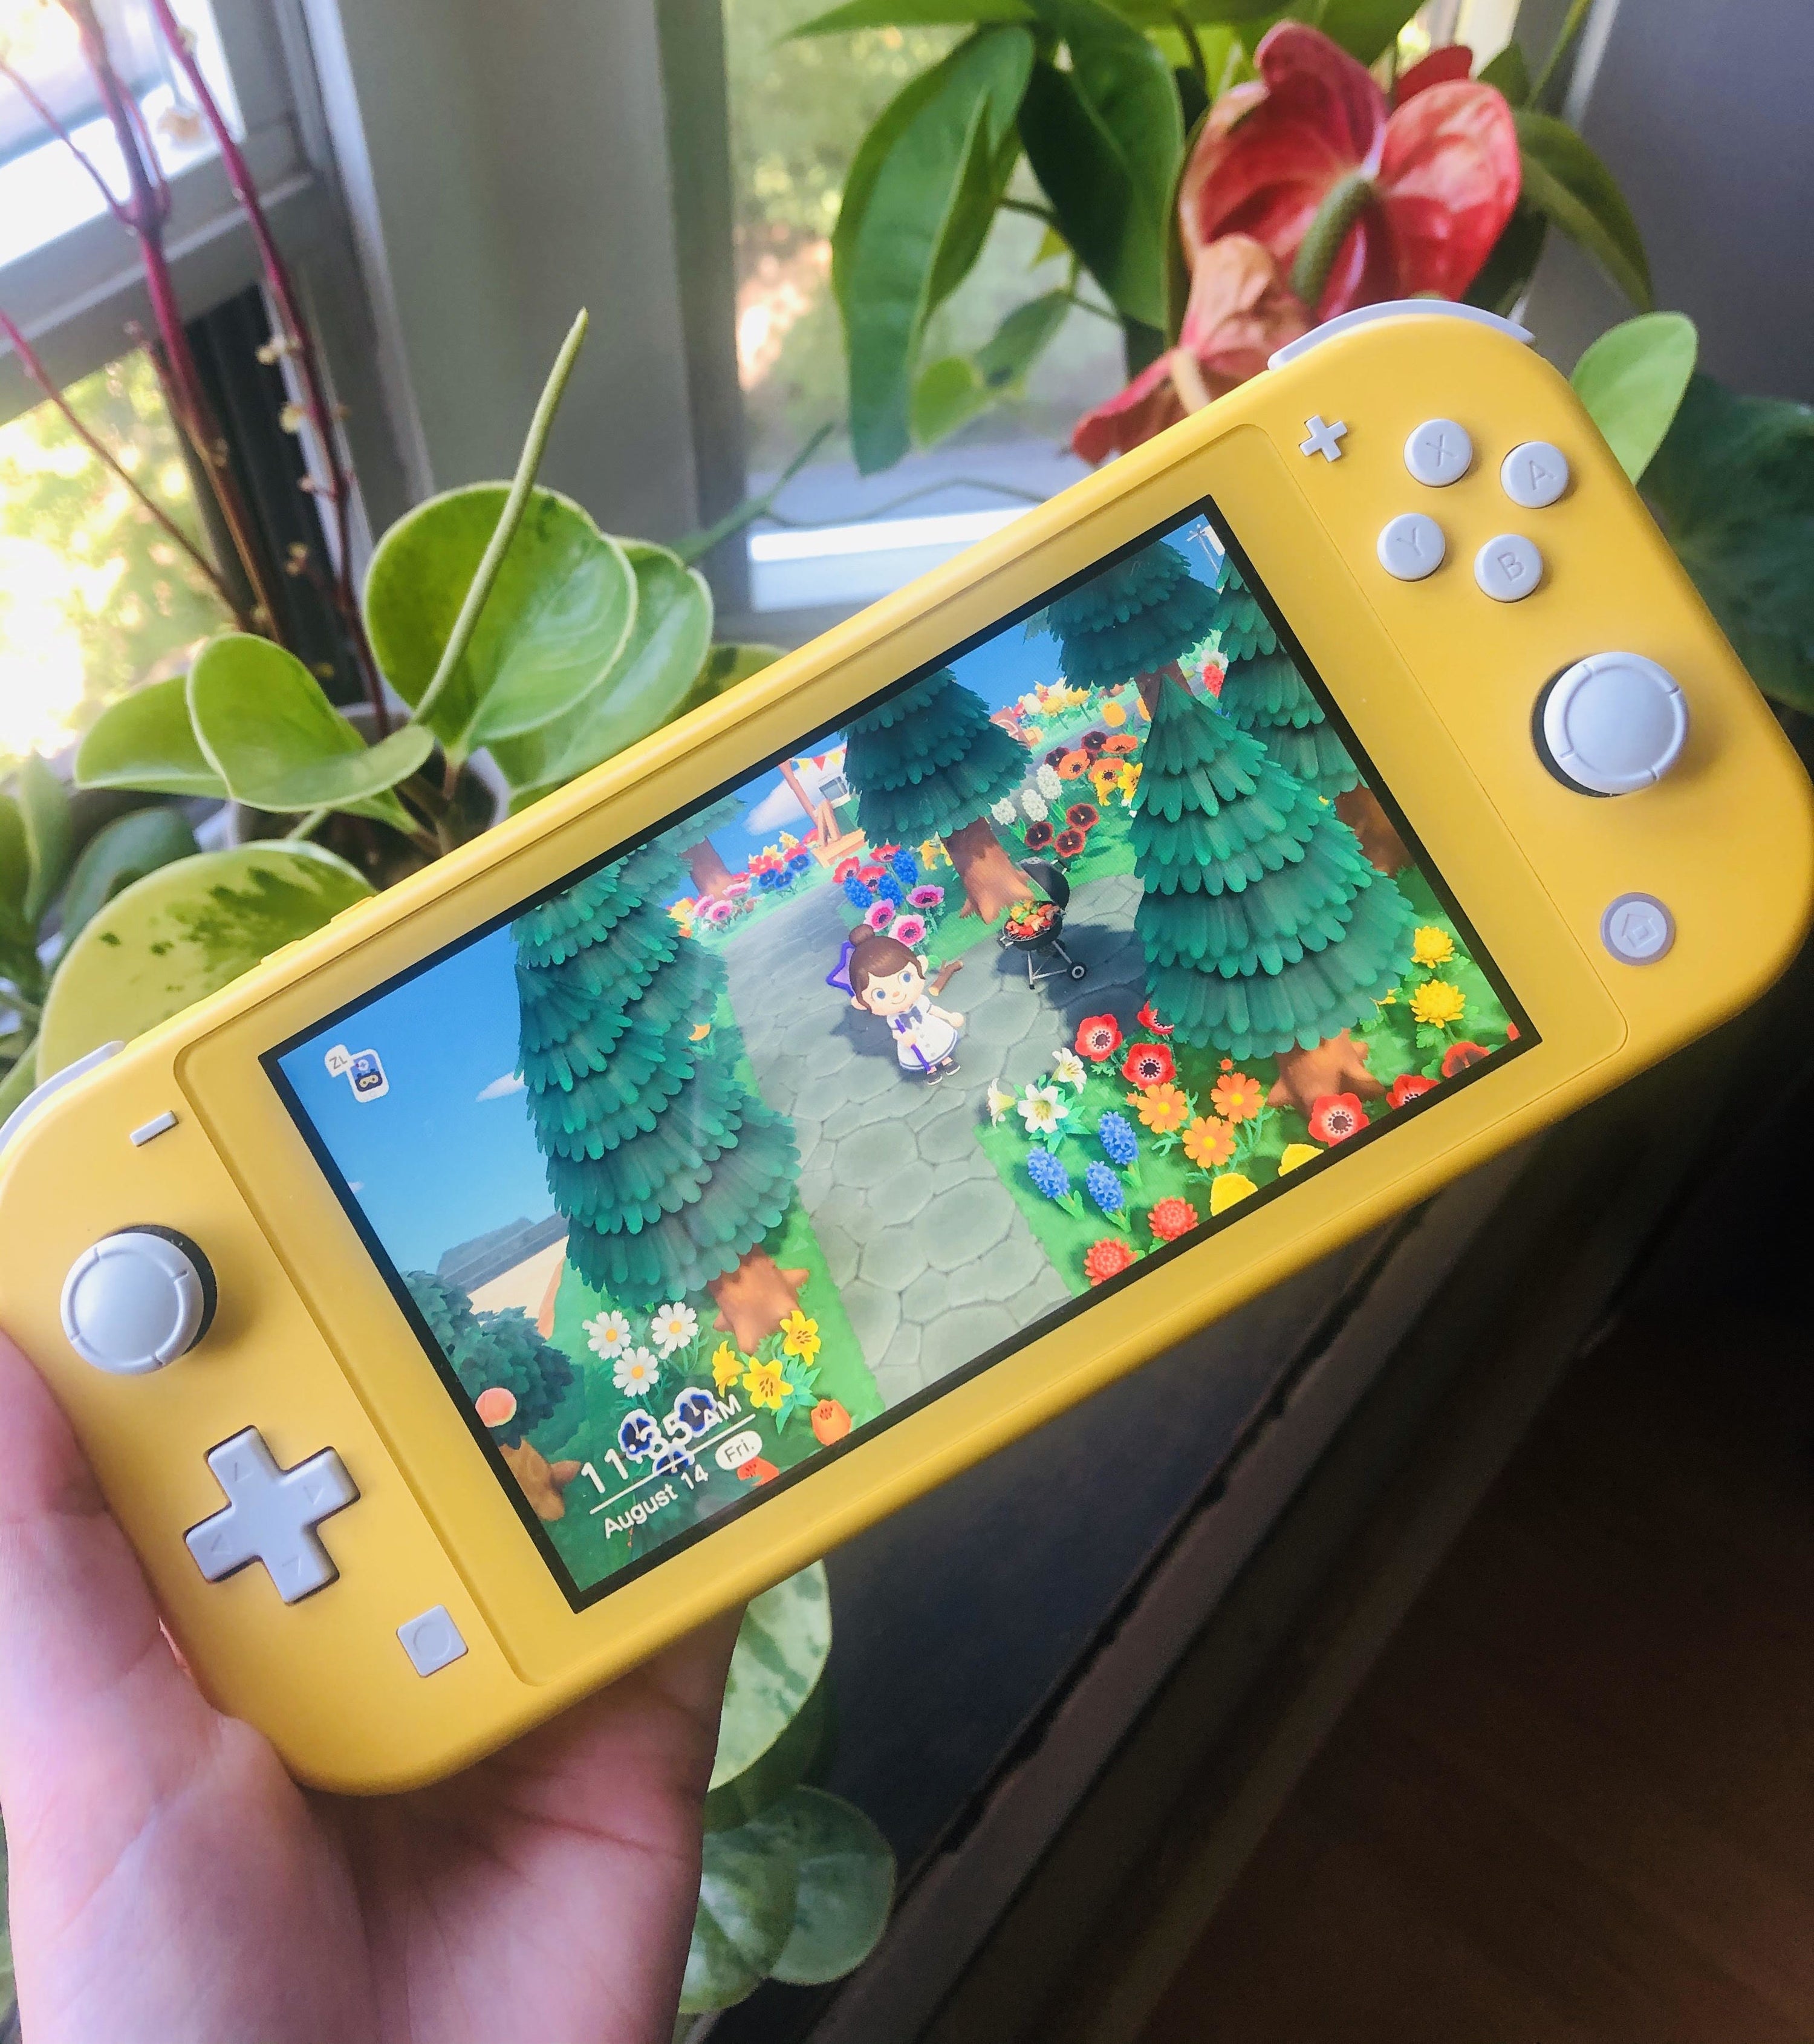 A person holding the Nintendo Switch in front of plants